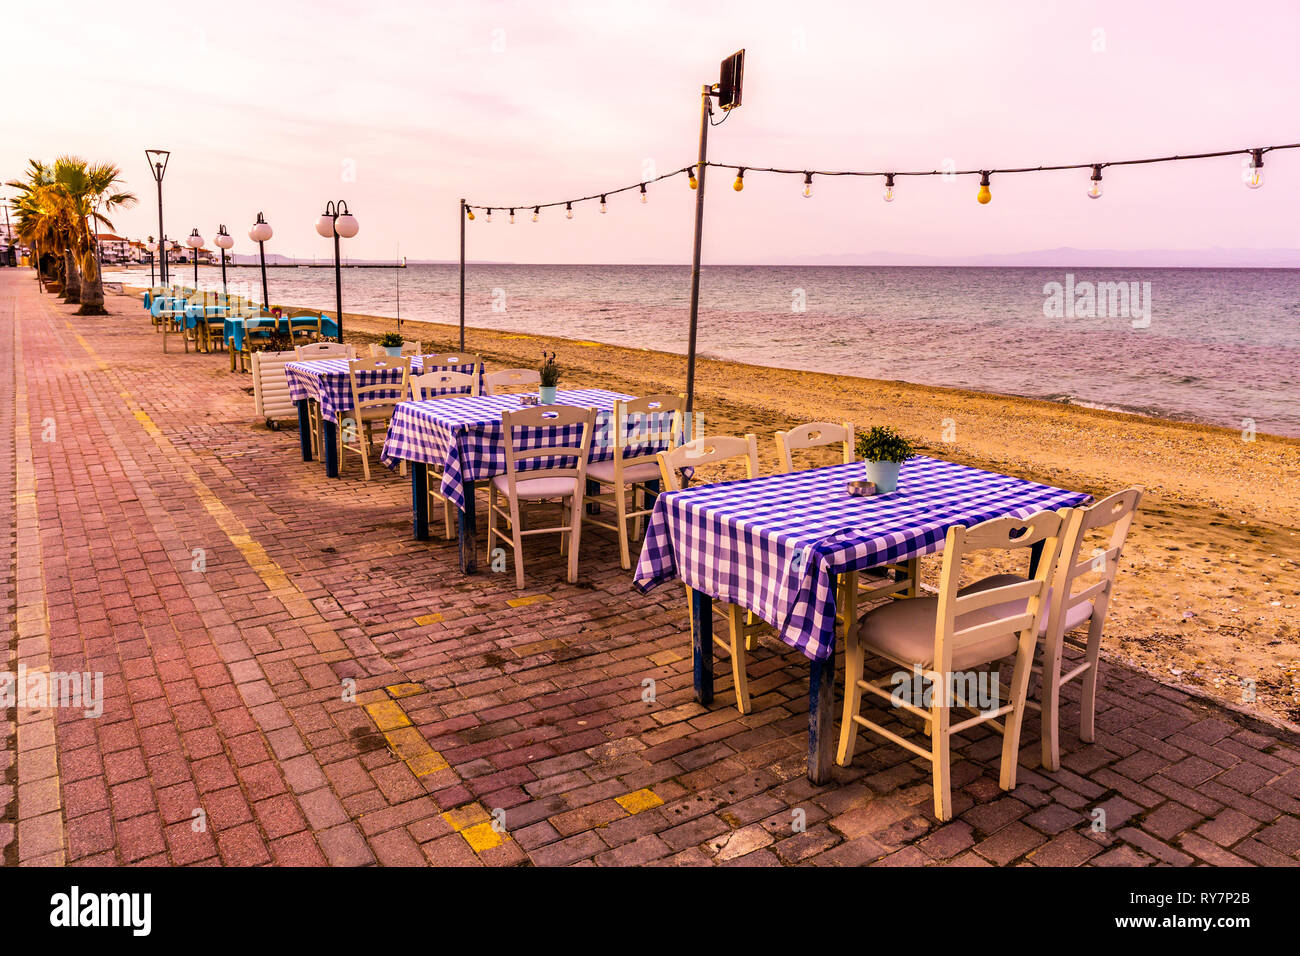 Pefkochori Promenade Street Empty Restaurant Tables and Chairs in a Row next to the Sandy Beach and Sea Stock Photo